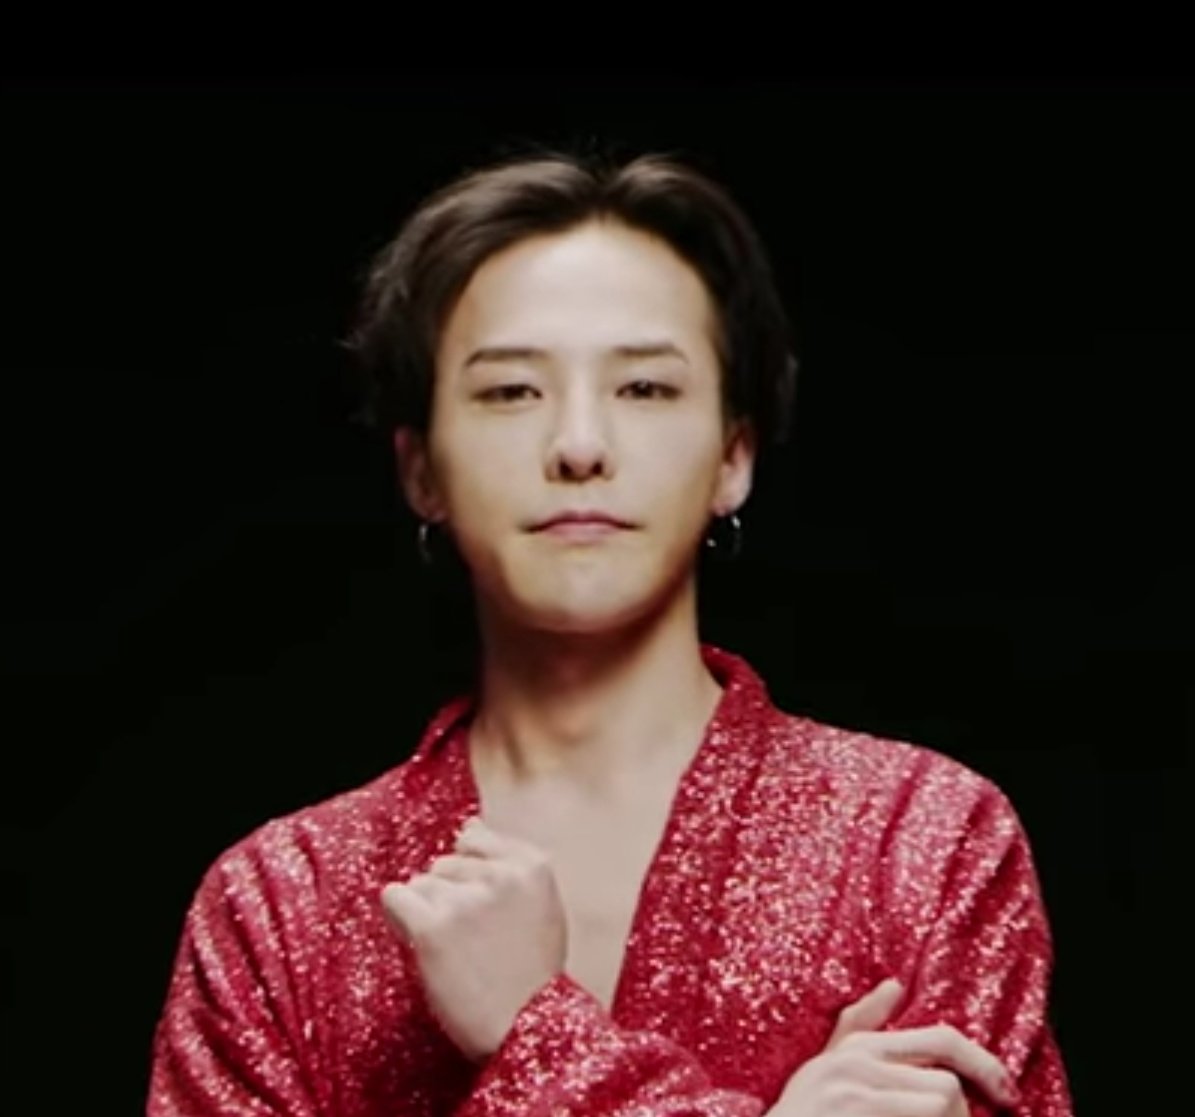 Kwon Ji Yong is searching for the comfort and reliable people that G-Dragon doesn't have offstage.